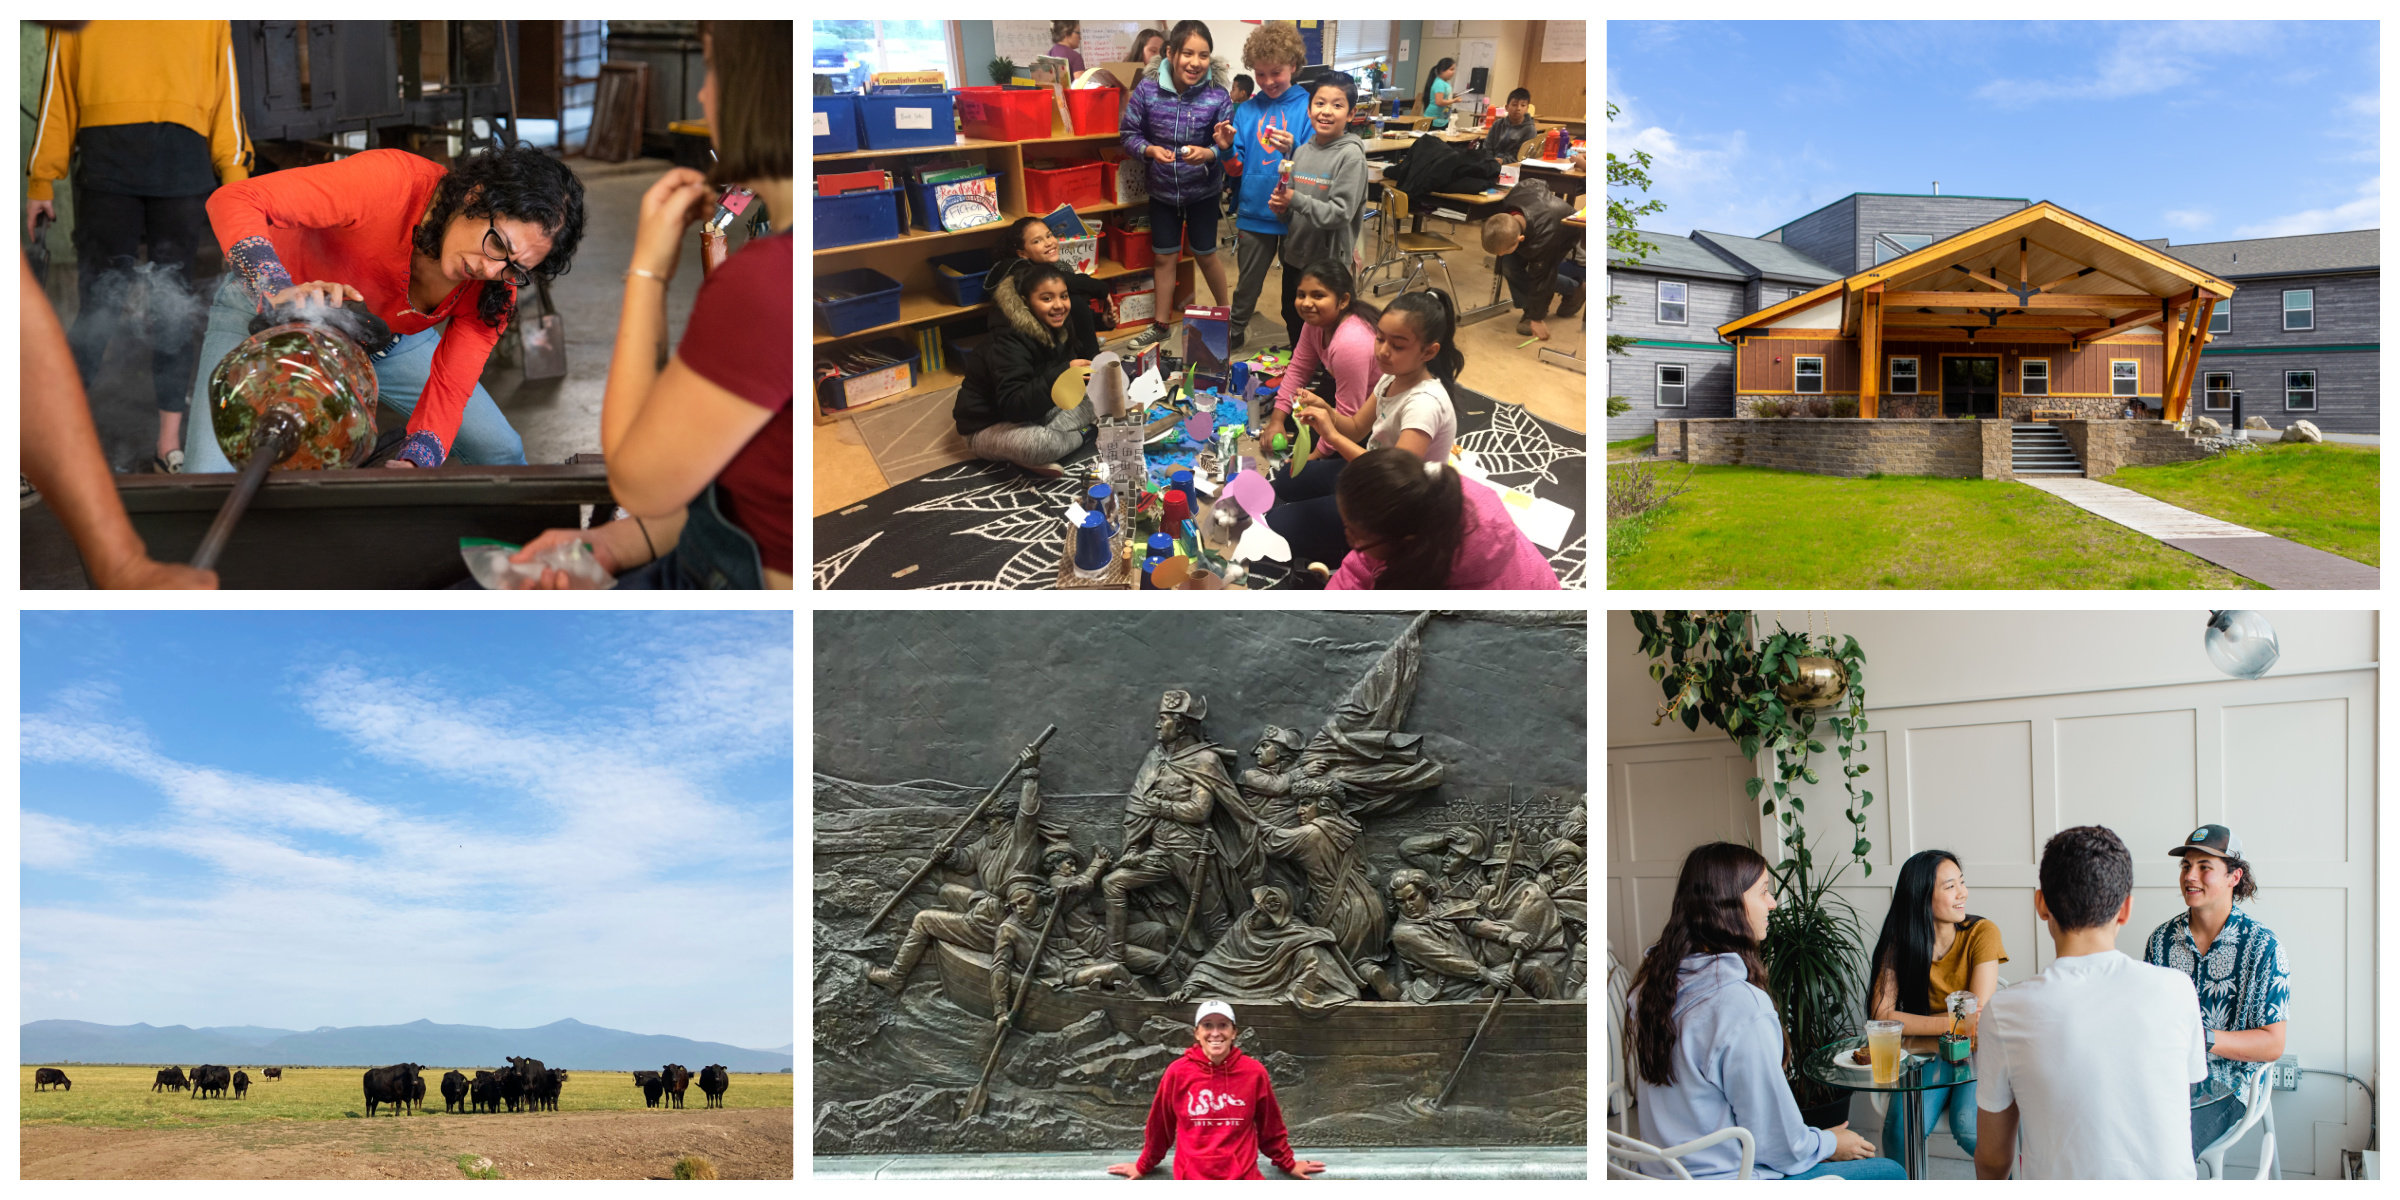 Image 1: a woman creating glass art. Image 2: a classroom of children doing arts and crafts. Image 3: a brand new facility. Image 4: an open field with cows and a mountain range behind them. Image 5: a person in a red sweatshirt in front of a carving of George Washington crossing the Delaware River. Image 6: four teenagers sitting around a table chatting and laughing. 